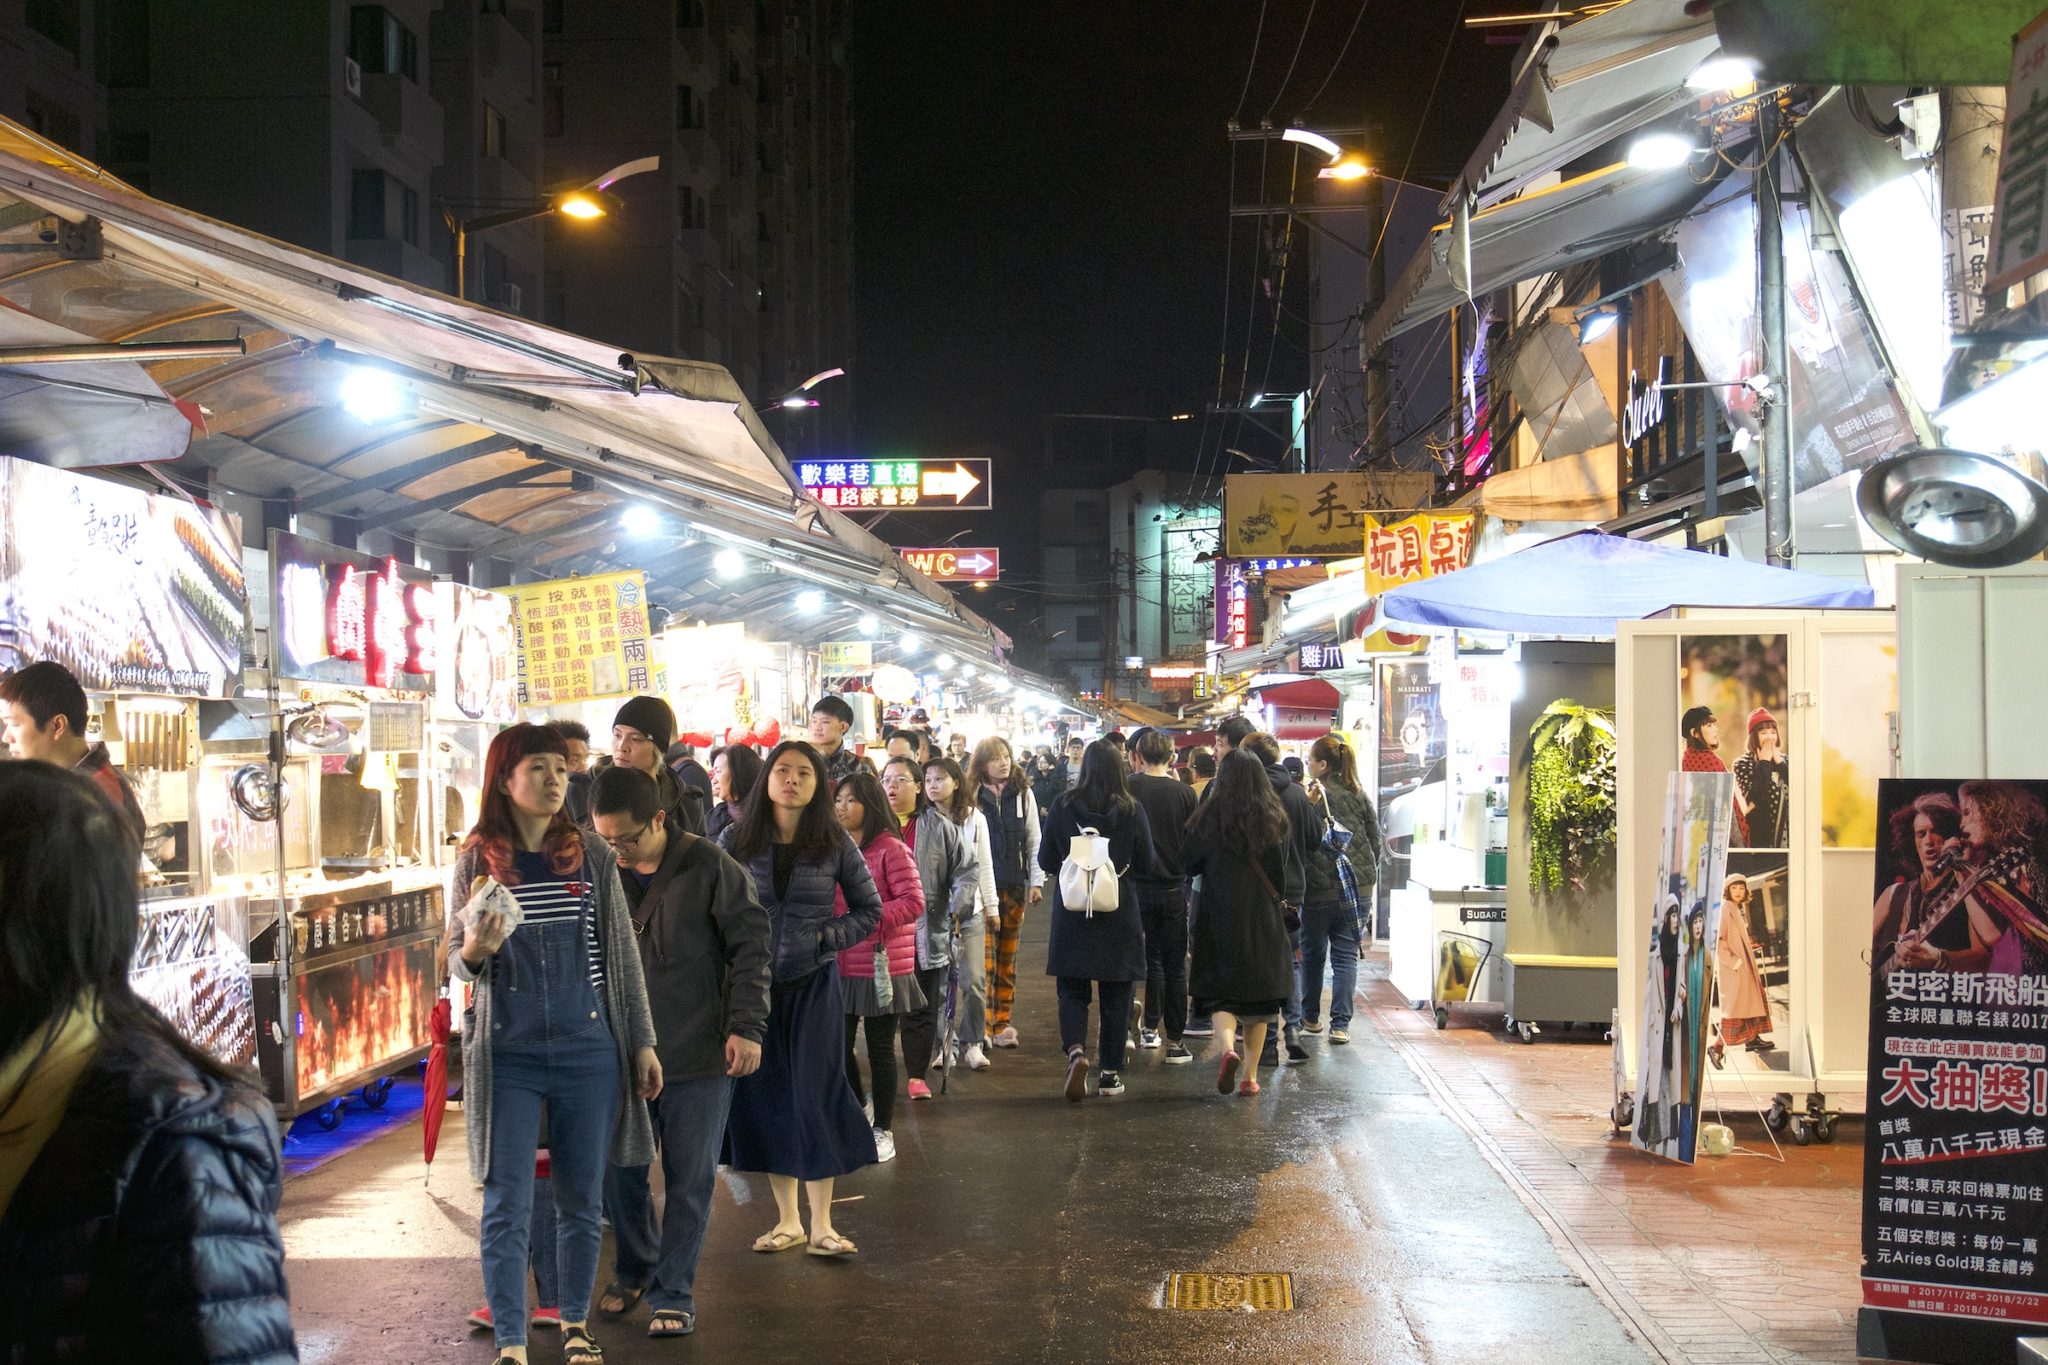 A Quick Guide to Taiwan: 9 Days in Taichung, Cingjing, Hualien, and ...